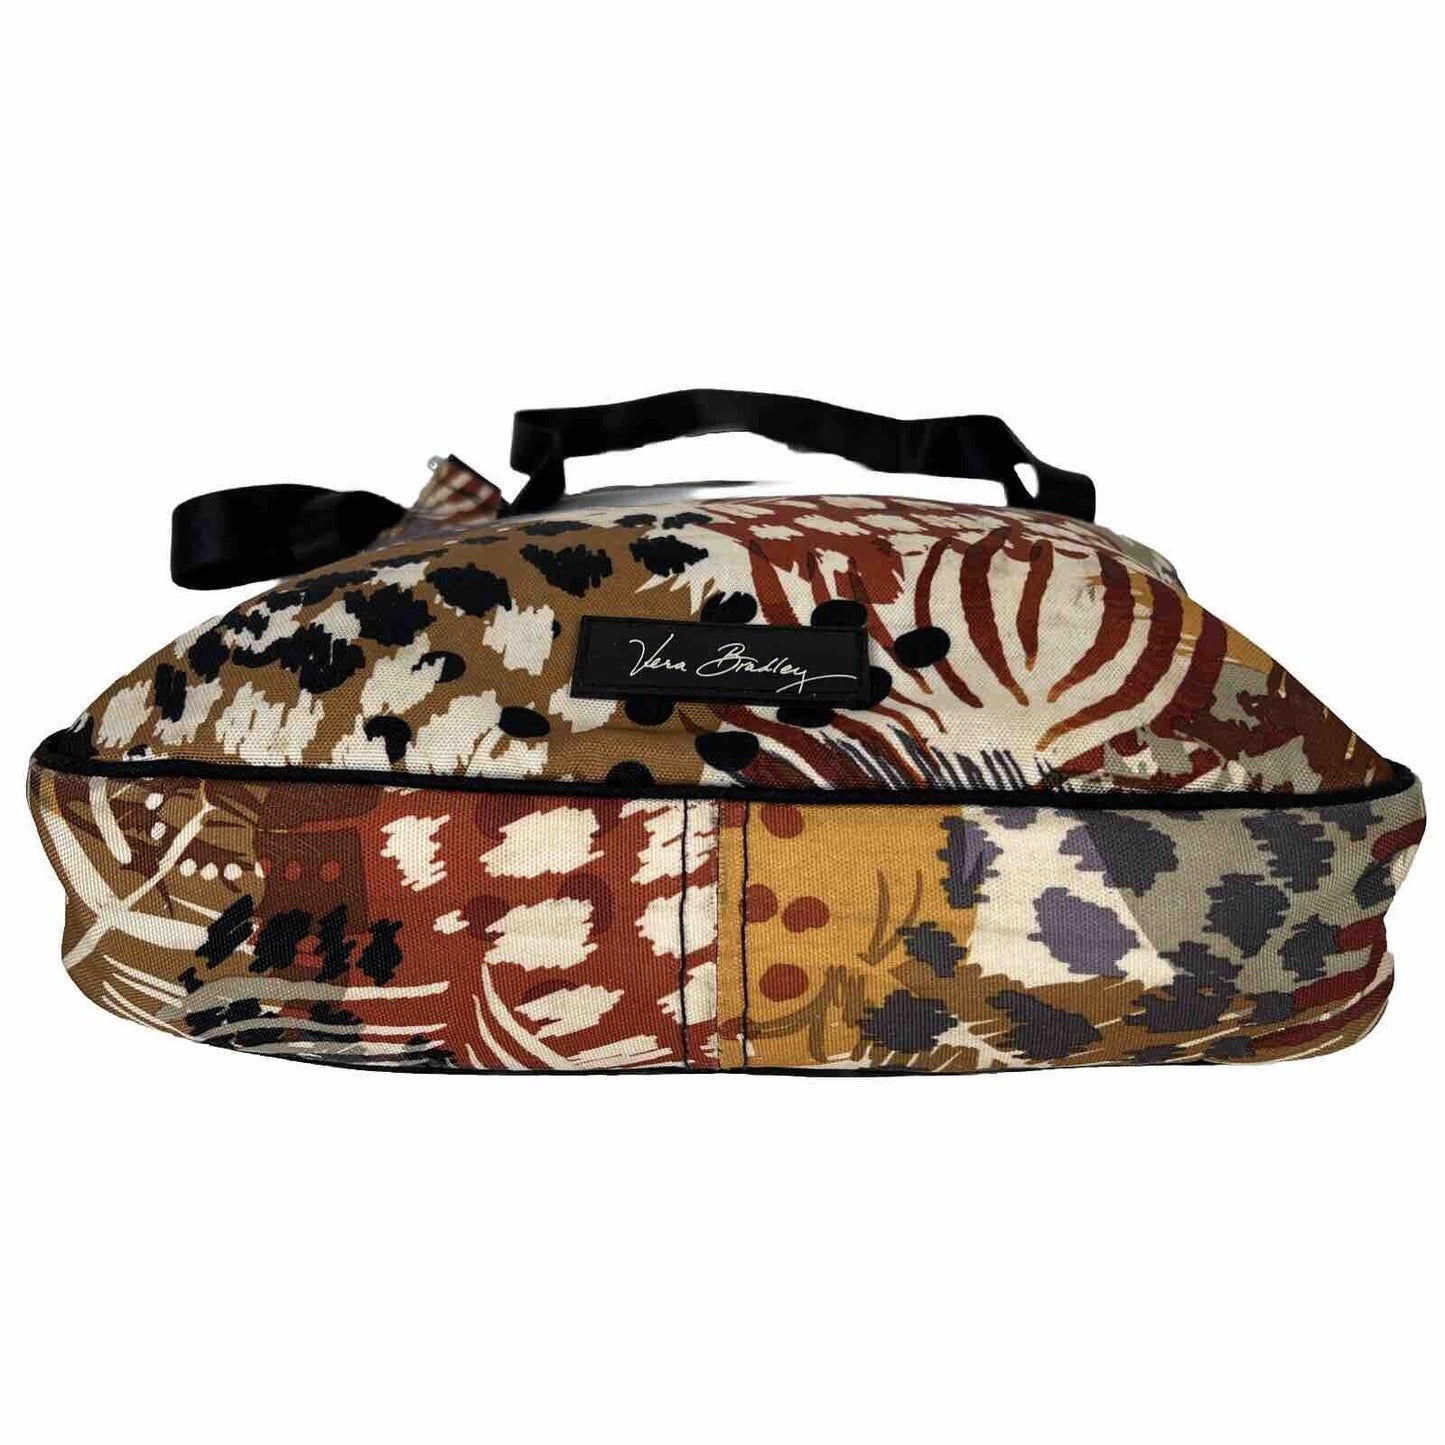 Vera Bradley Women Multicolor Painted Feathers Crossbody Purse and Wallet